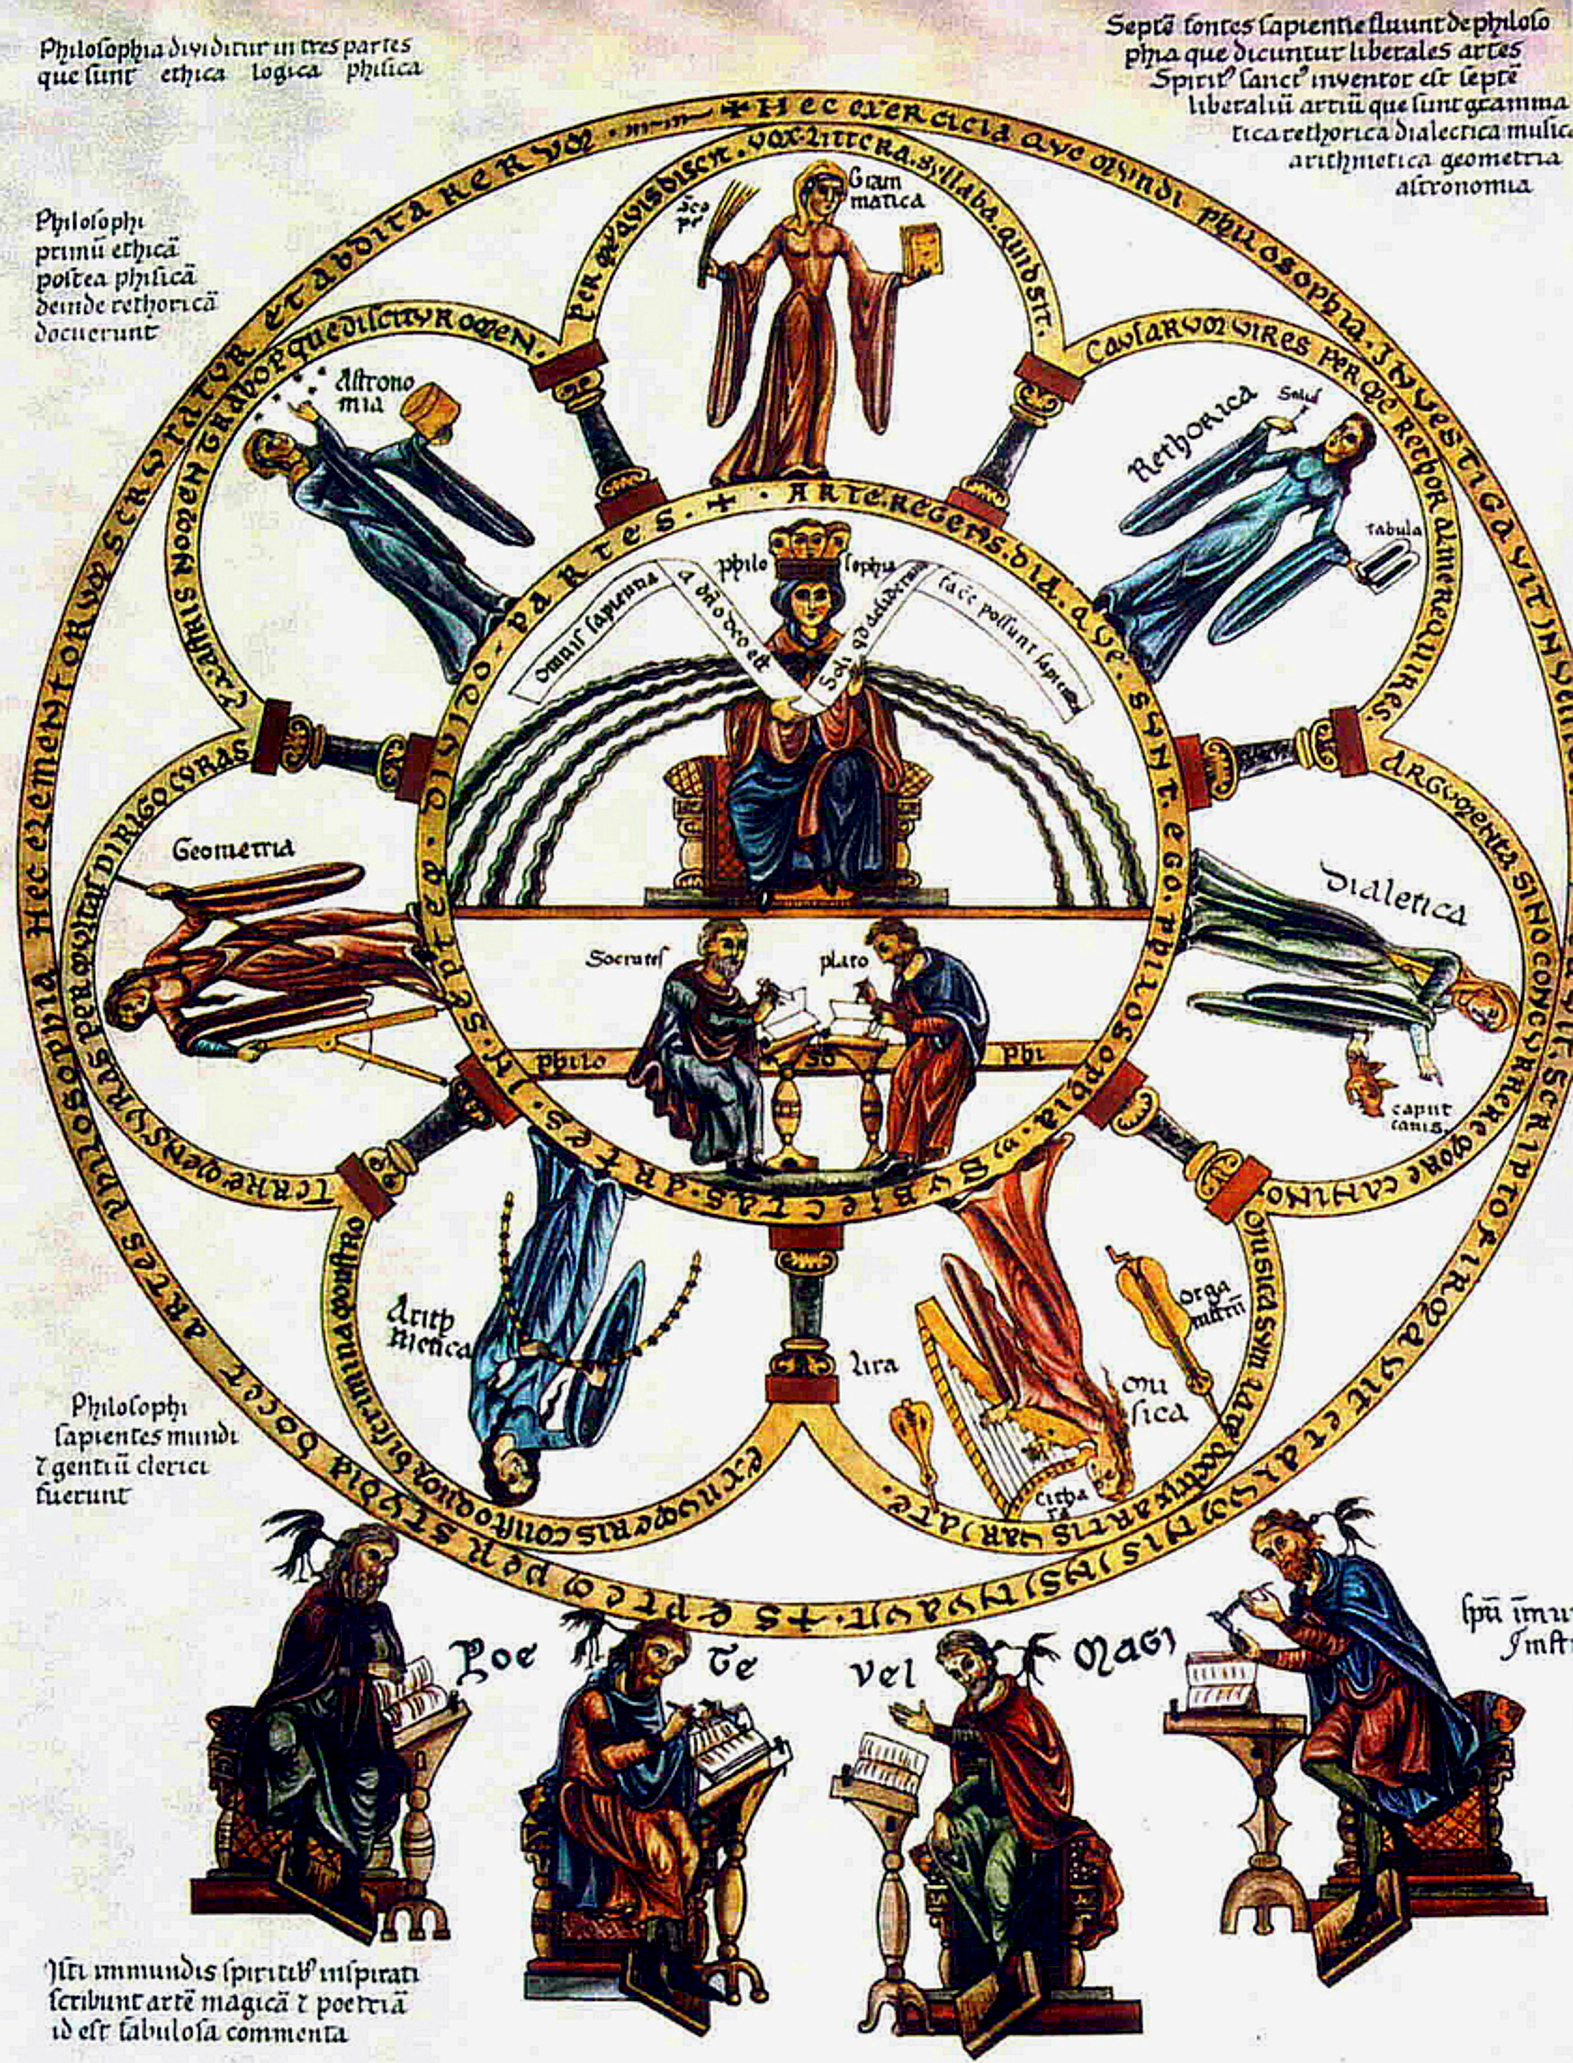 Philosophy seated between the seven liberal arts; picture from the Hortus deliciarum of Herrad von Landsberg (12th century).